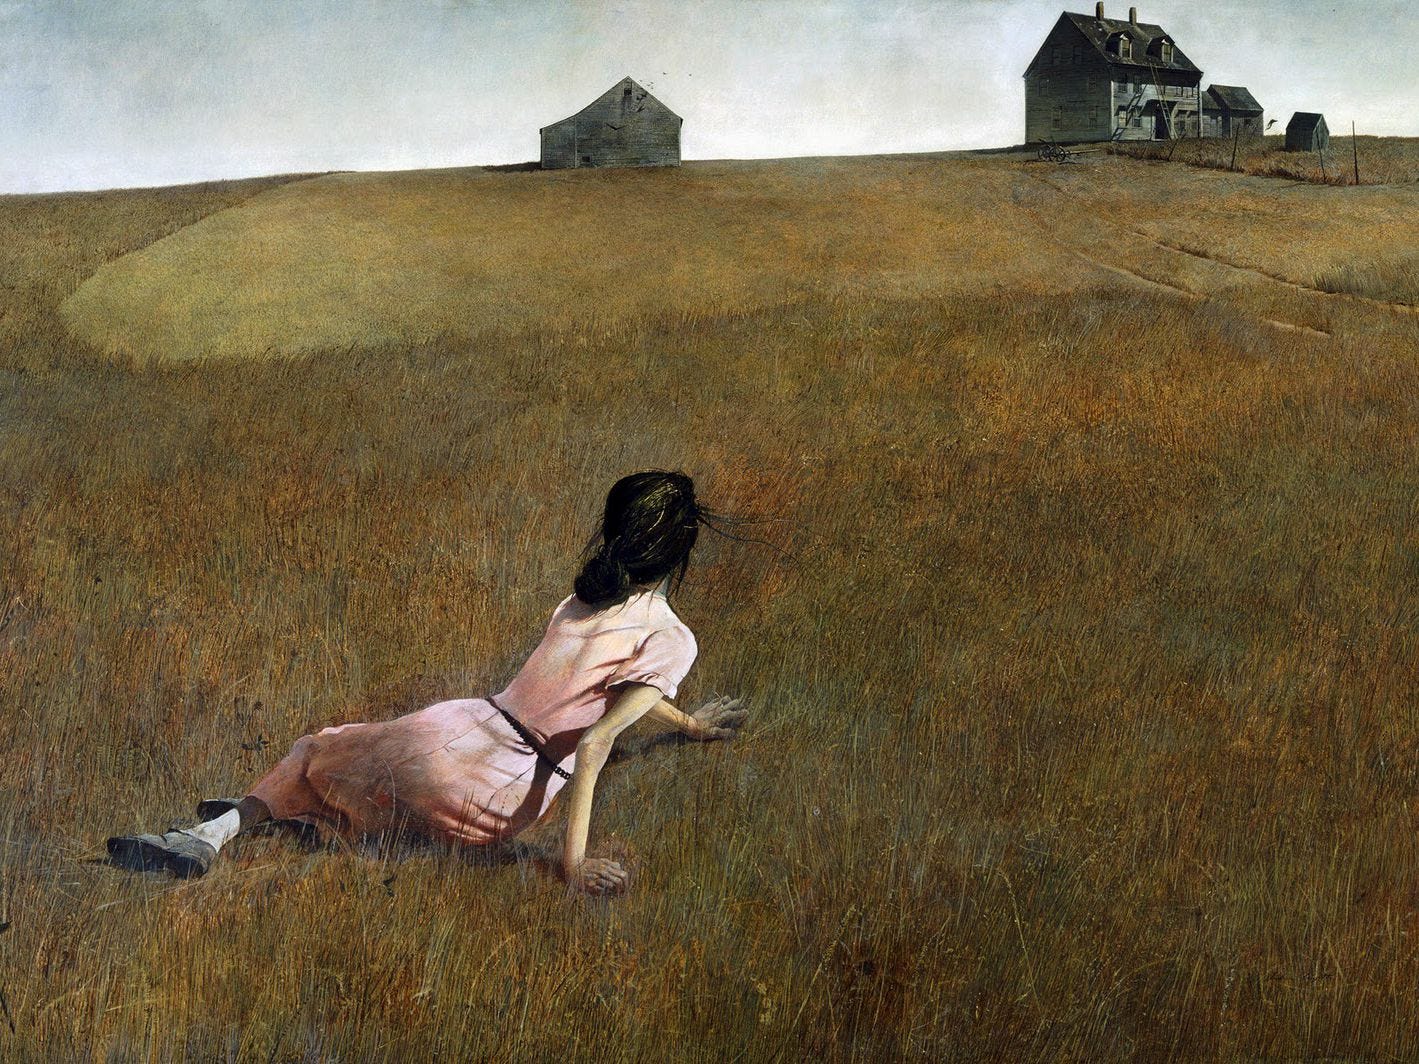 An In-Depth Look at 'Christina's World' by Andrew Wyeth